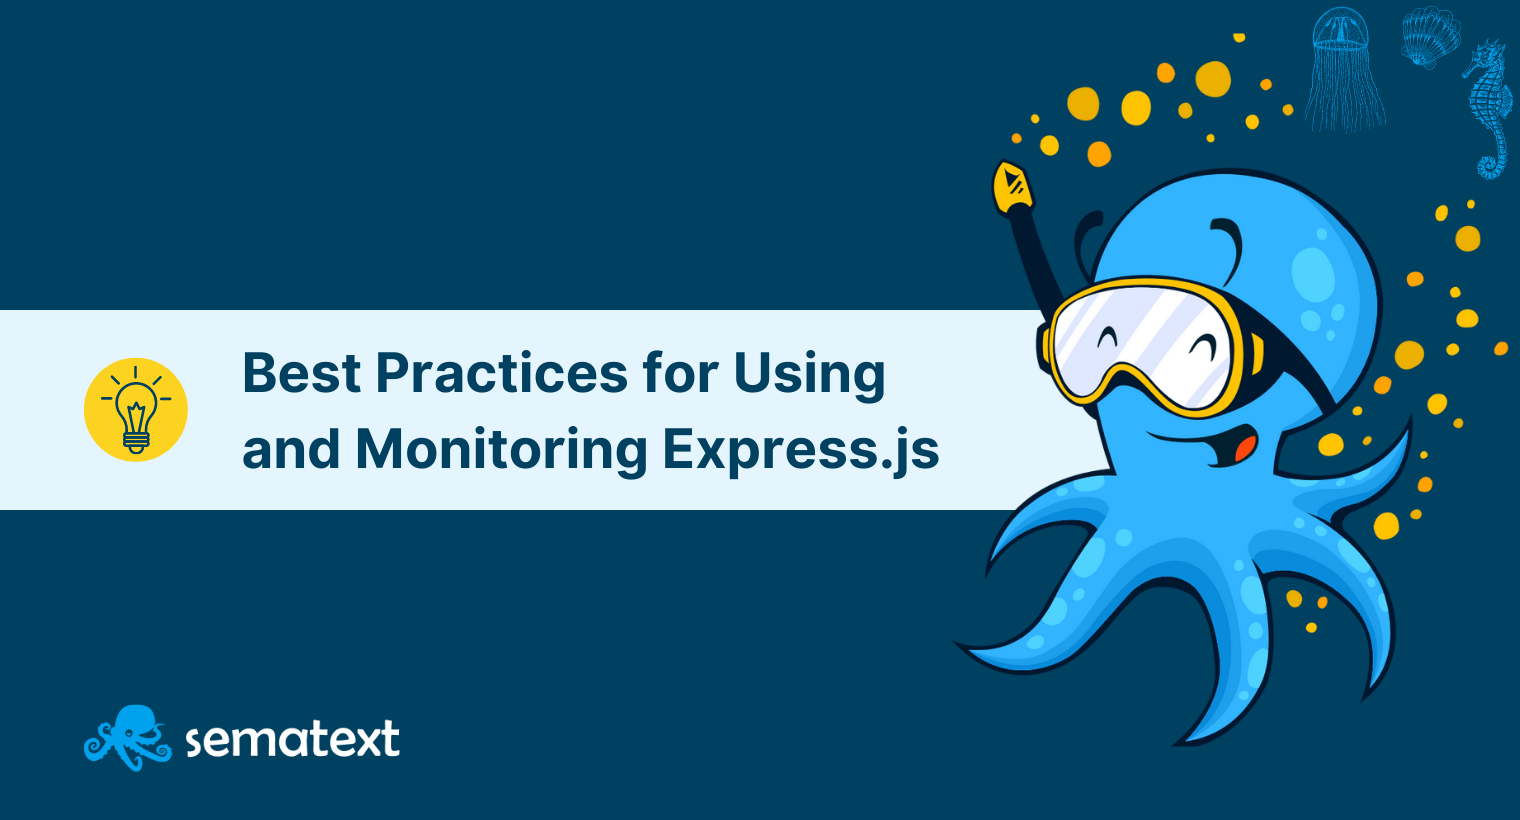 Performance Best Practices for Using and Monitoring Express.js in Production